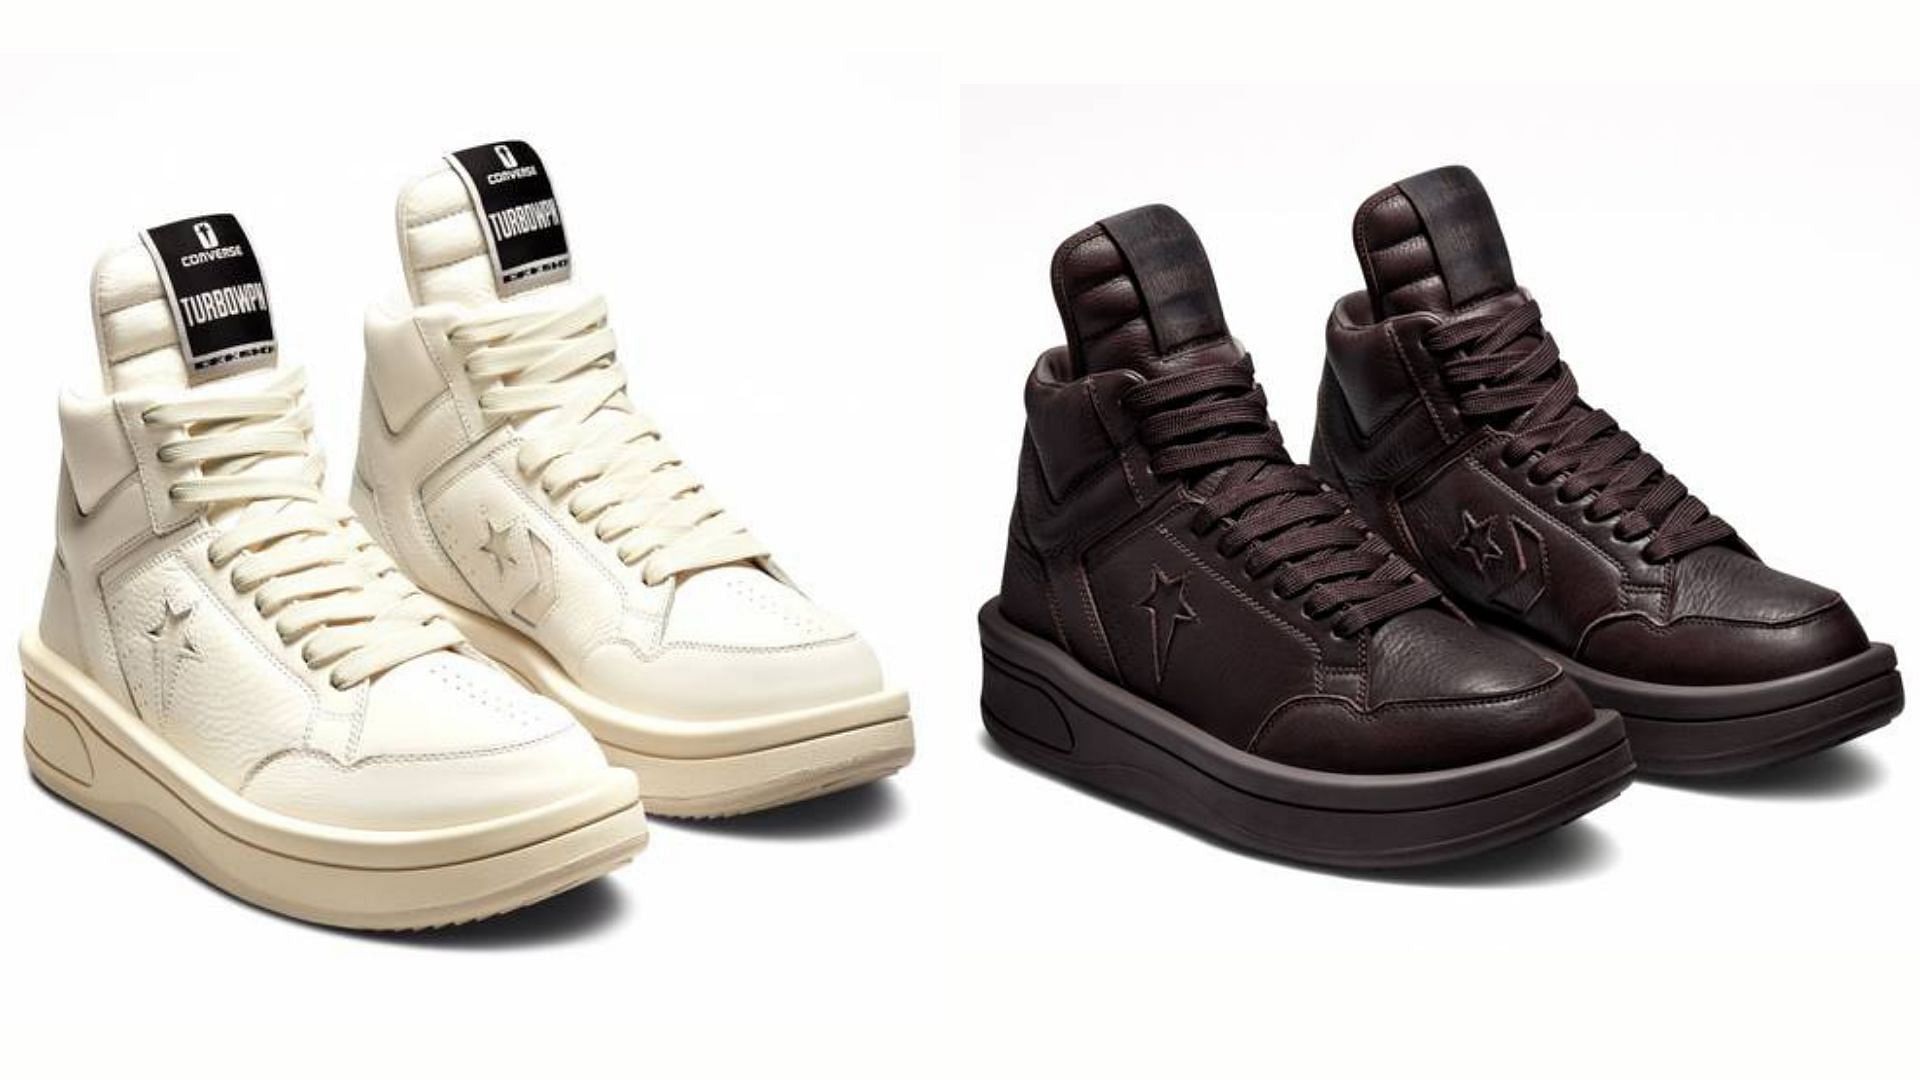 Rick Owens x Converse reimagined the classic basketball shoes in two colorways (Image via Converse)